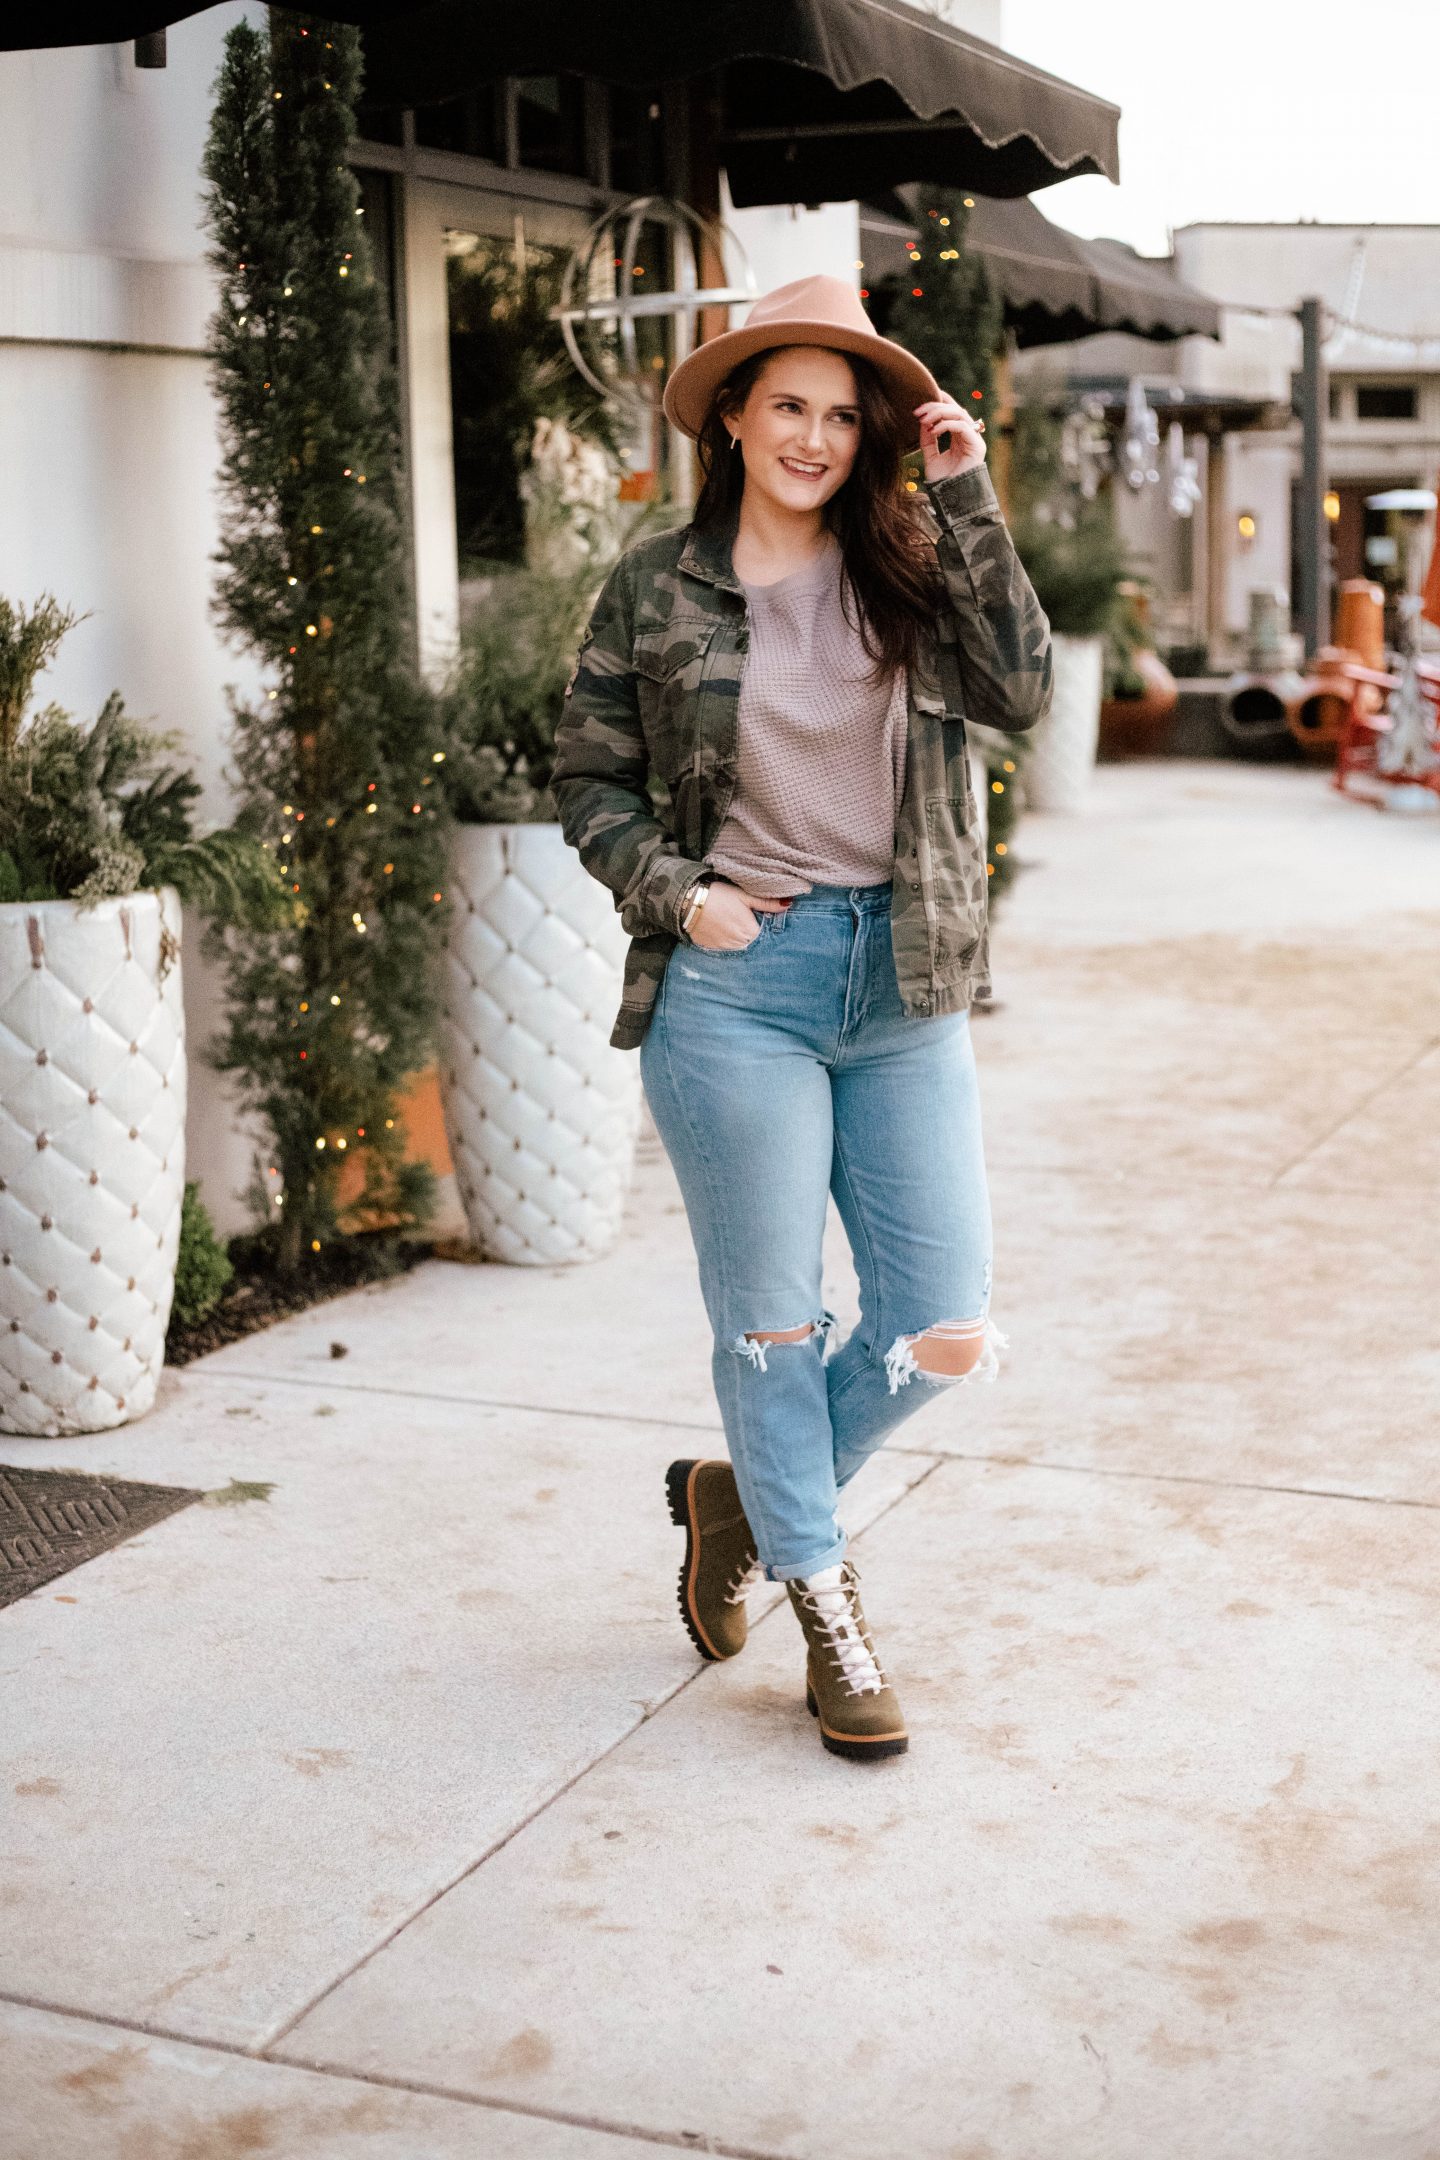 My New Favorite Jeans & Boots — And Why You Need Them In Your Closet